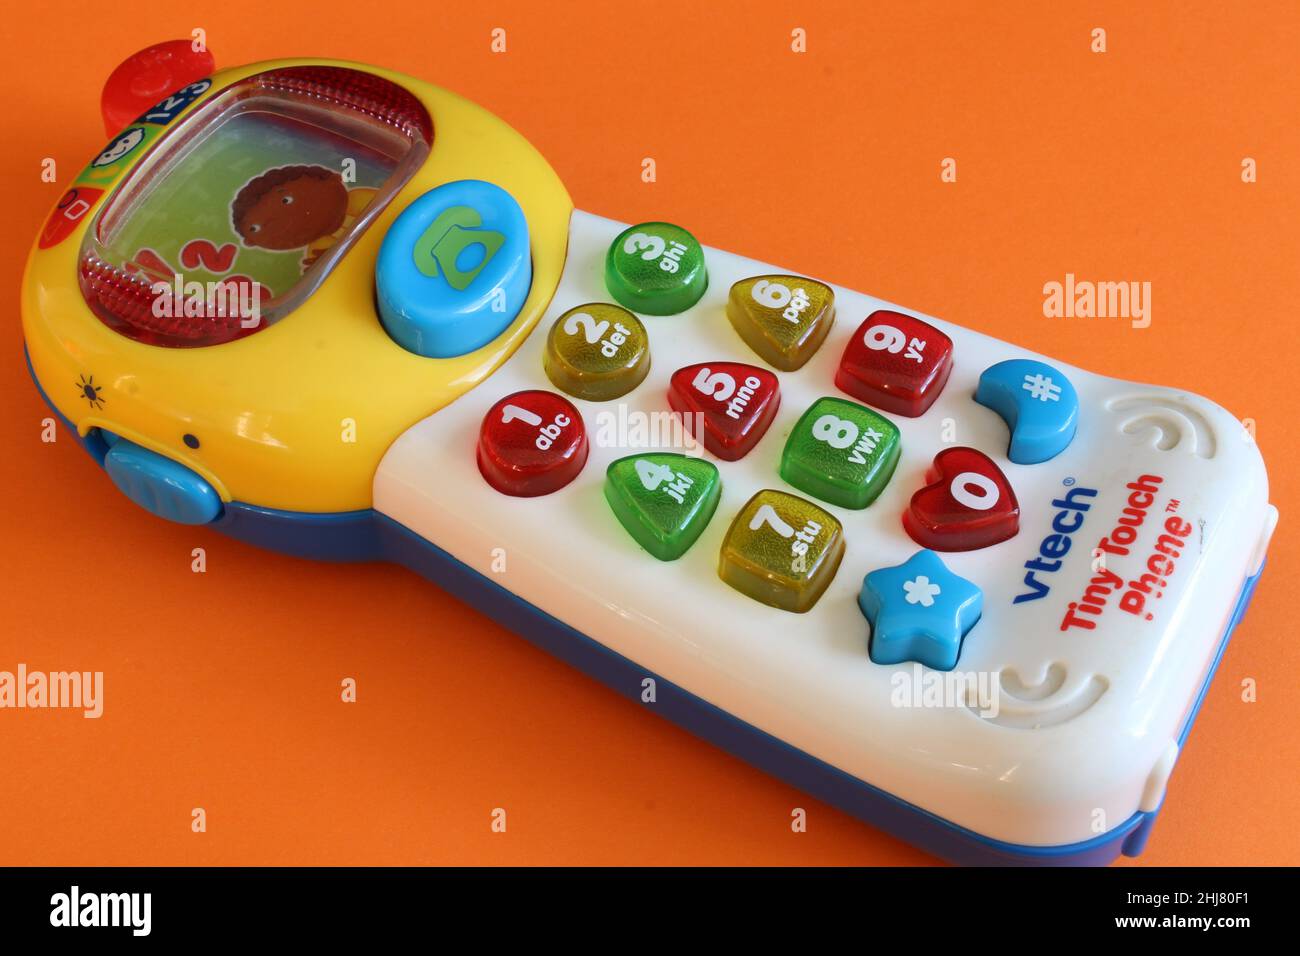 Vtech toy phone isolated on an orange background. Lancashire, UK, 27-01-2022 Toddler toys and cognitive development concept Stock Photo